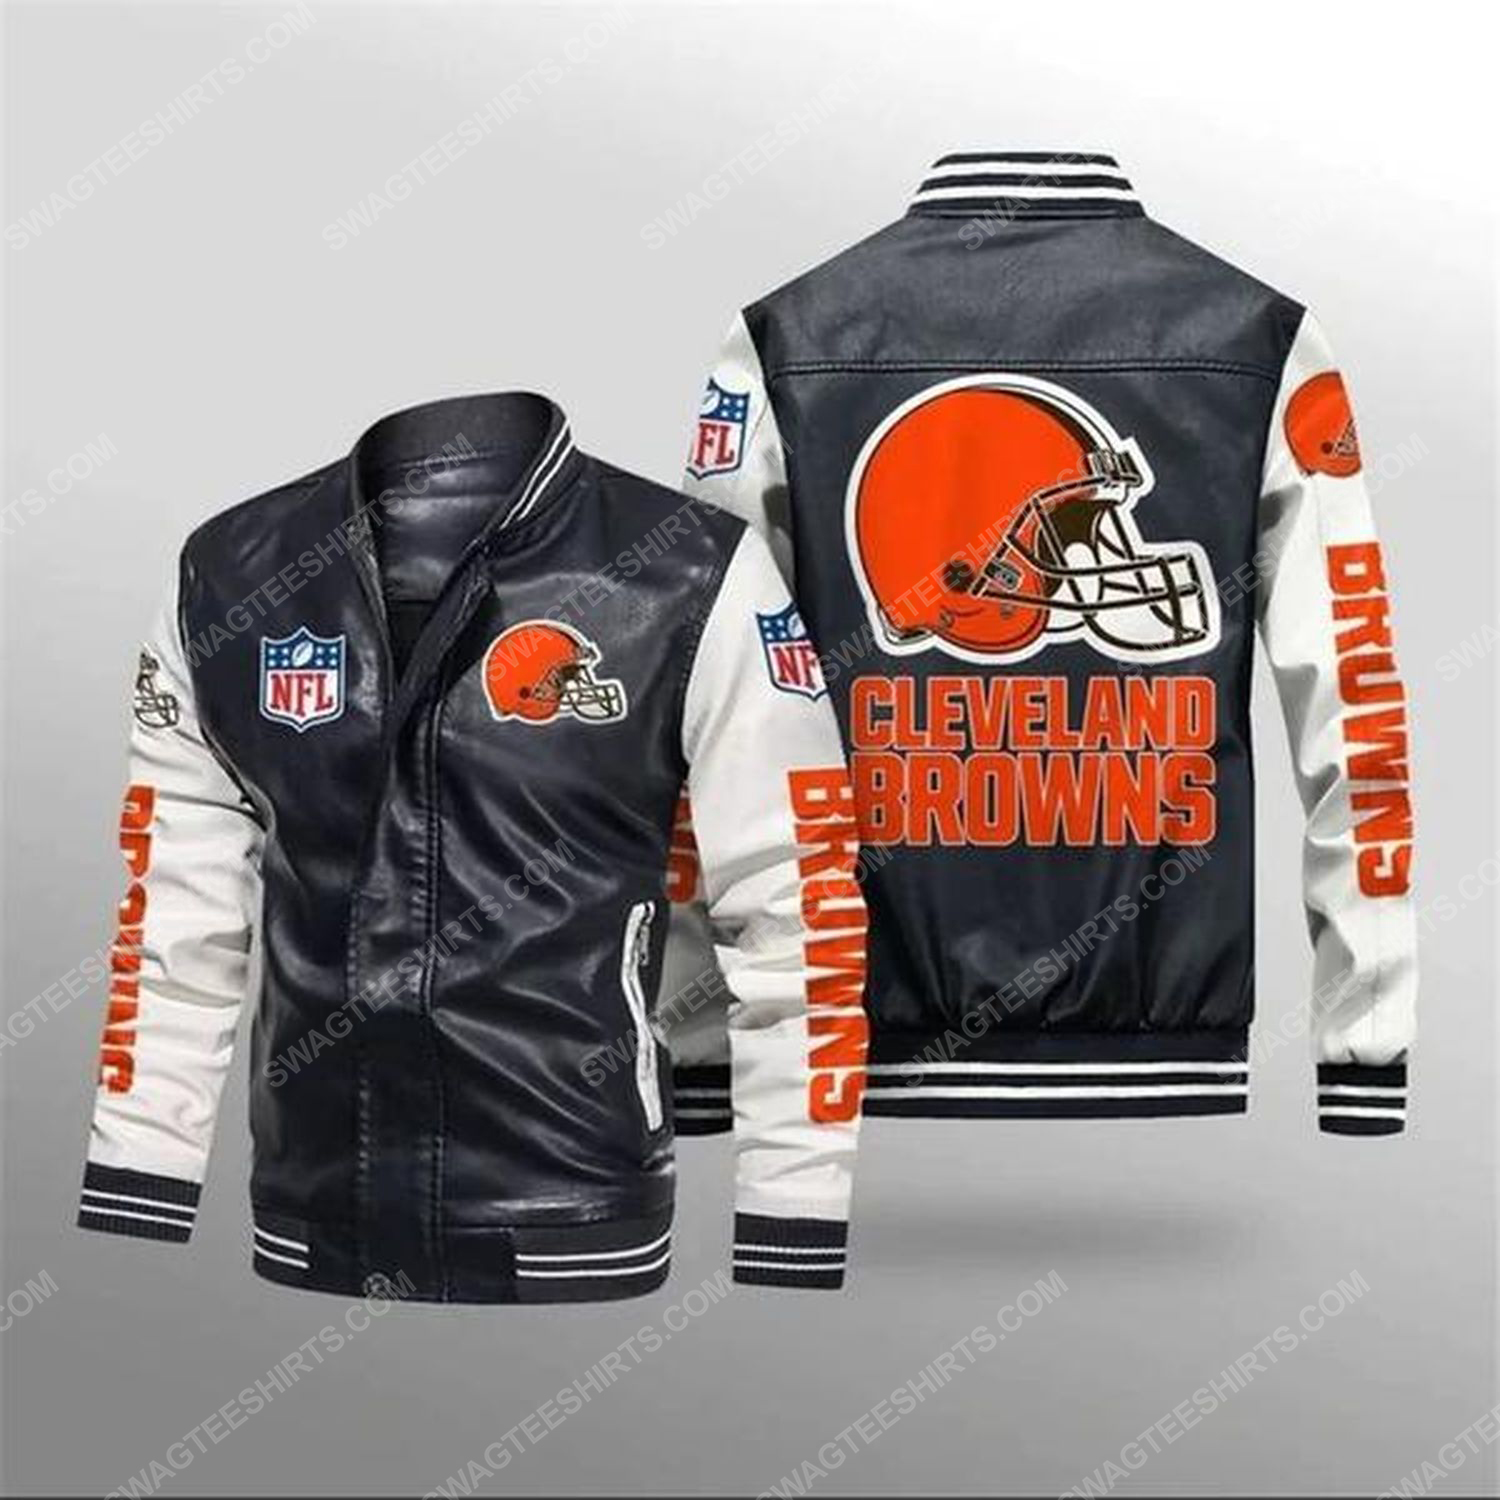 Cleveland browns all over print leather bomber jacket - white